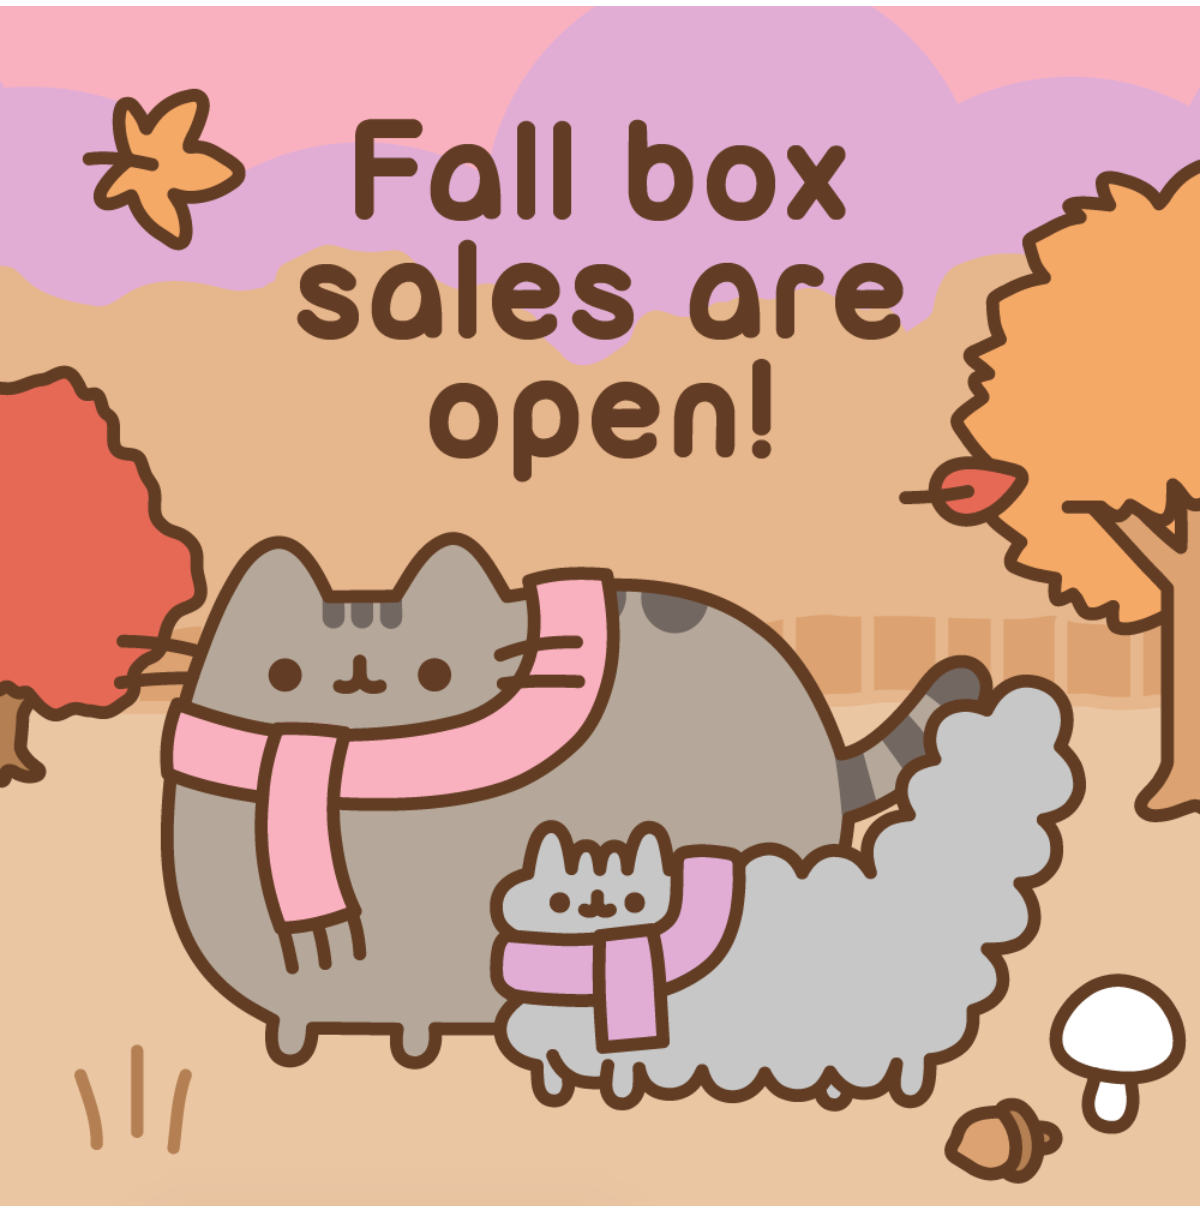 Pusheen Box Subscriptions Are Open! Fall 2018 Box Time!